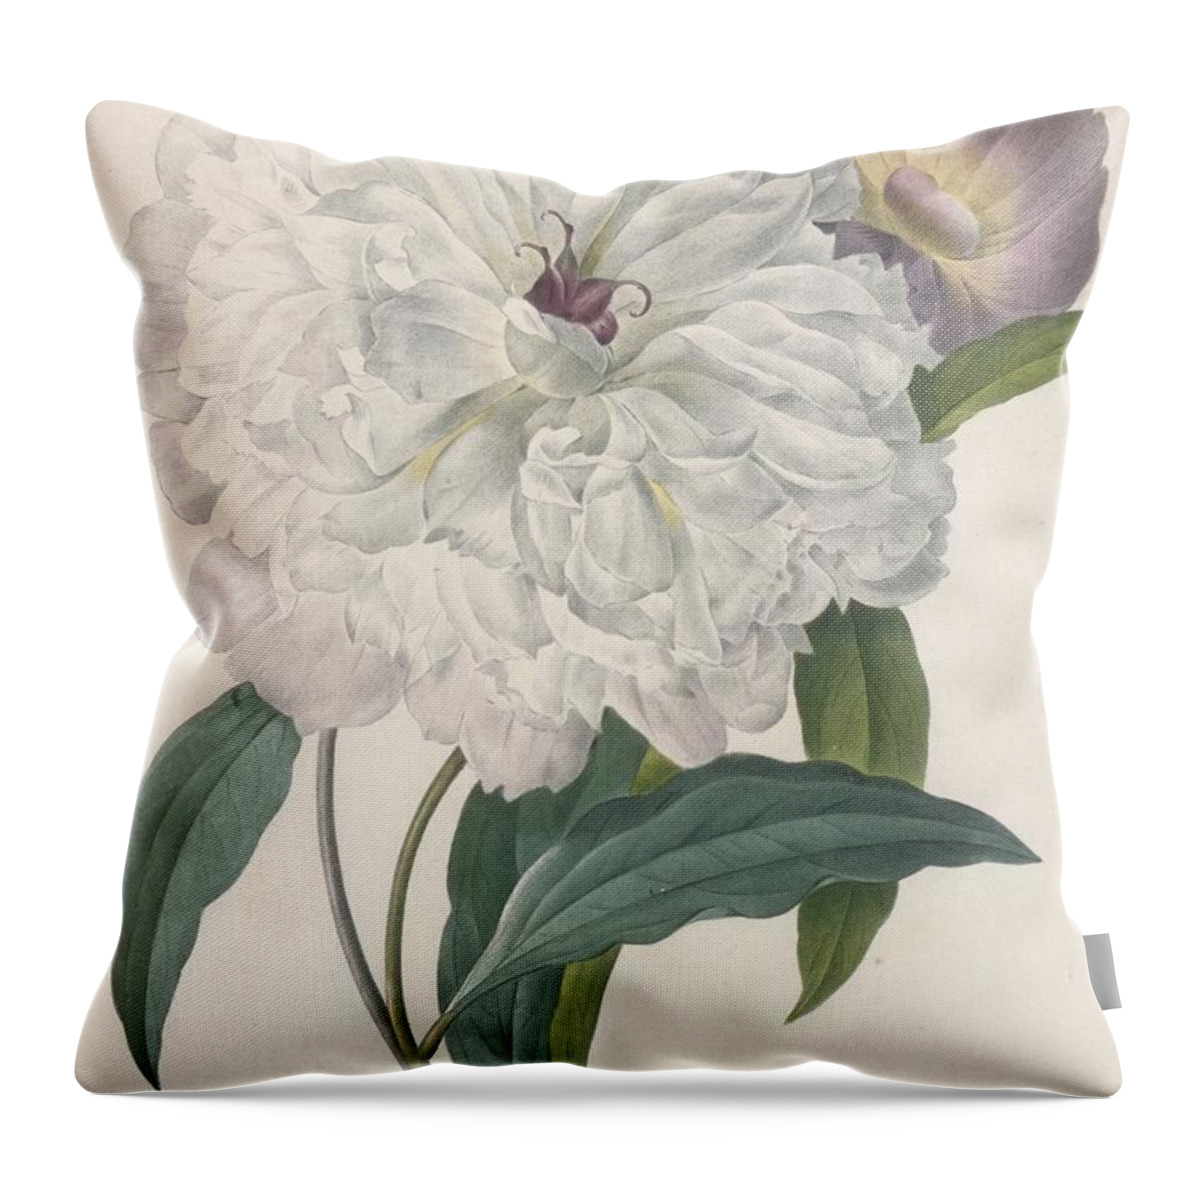 Floral Throw Pillow featuring the painting Peony by Pierre Joseph Redoute